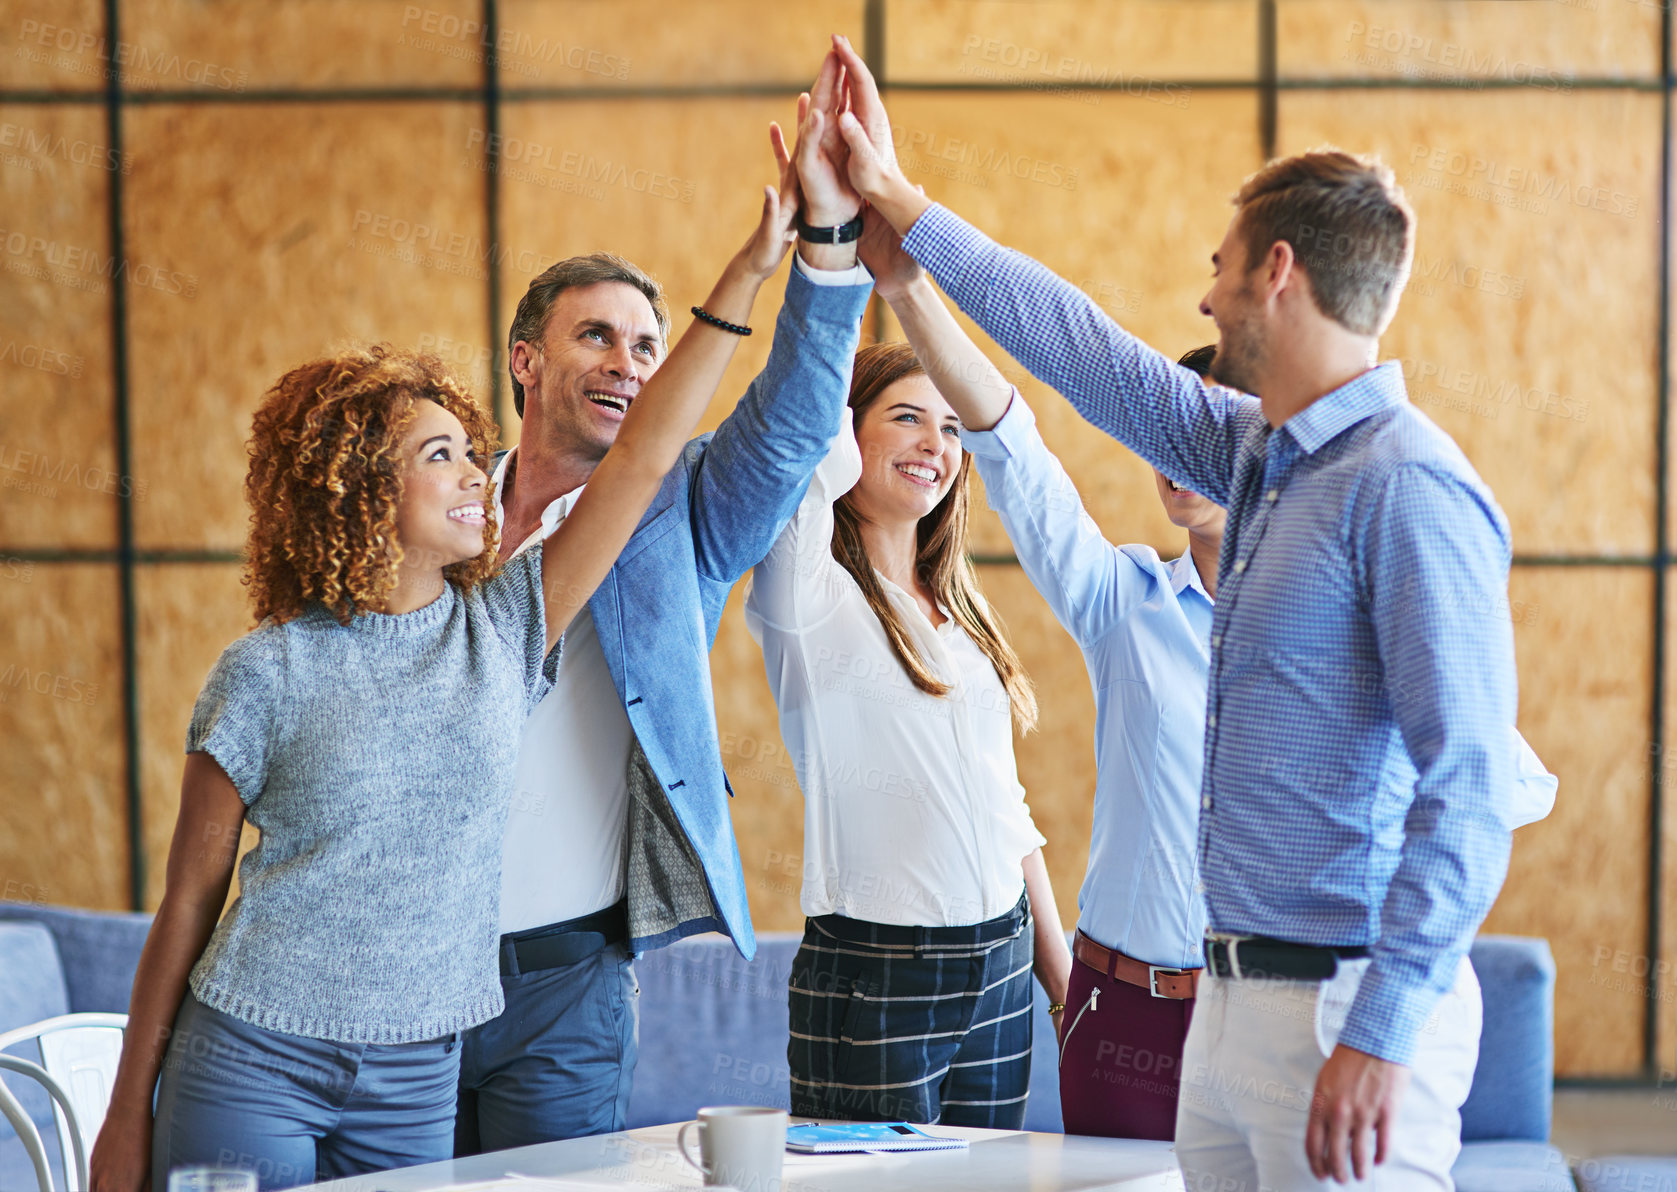 Buy stock photo Shot of a group of smiling colleagues high fiving together in an office